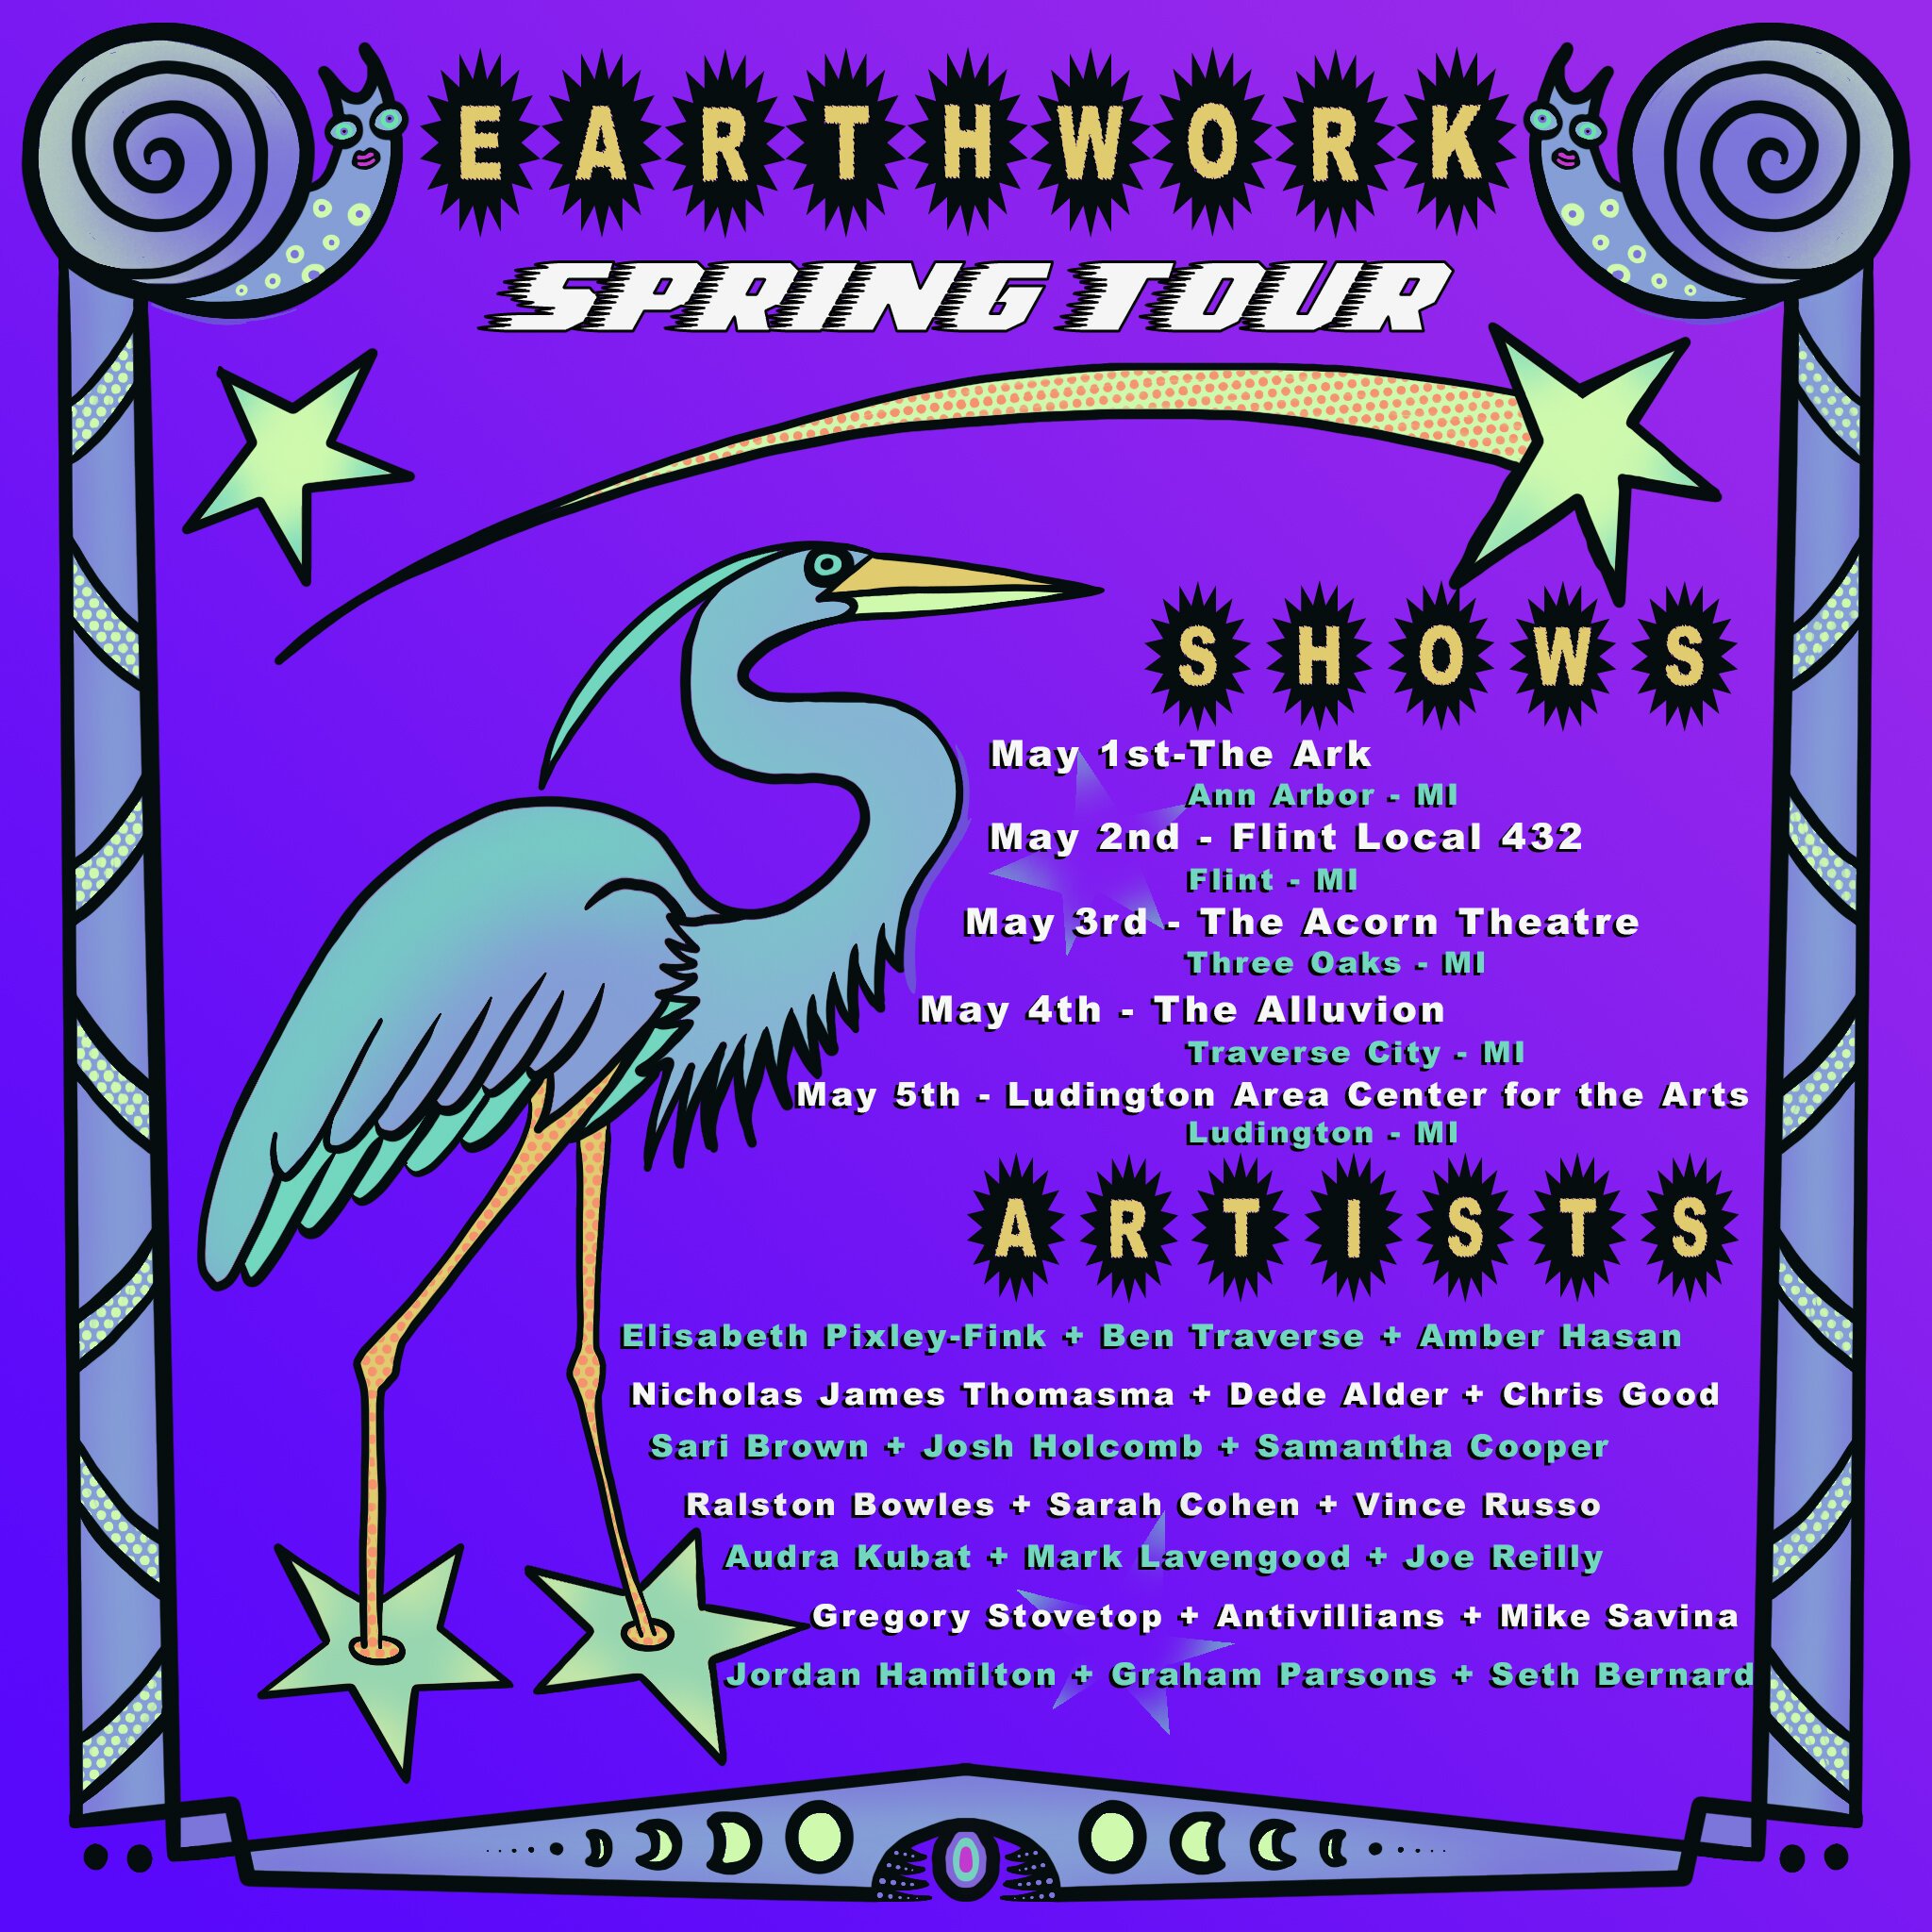 Promotional flier for the Earthwork Music Collective Spring tour.